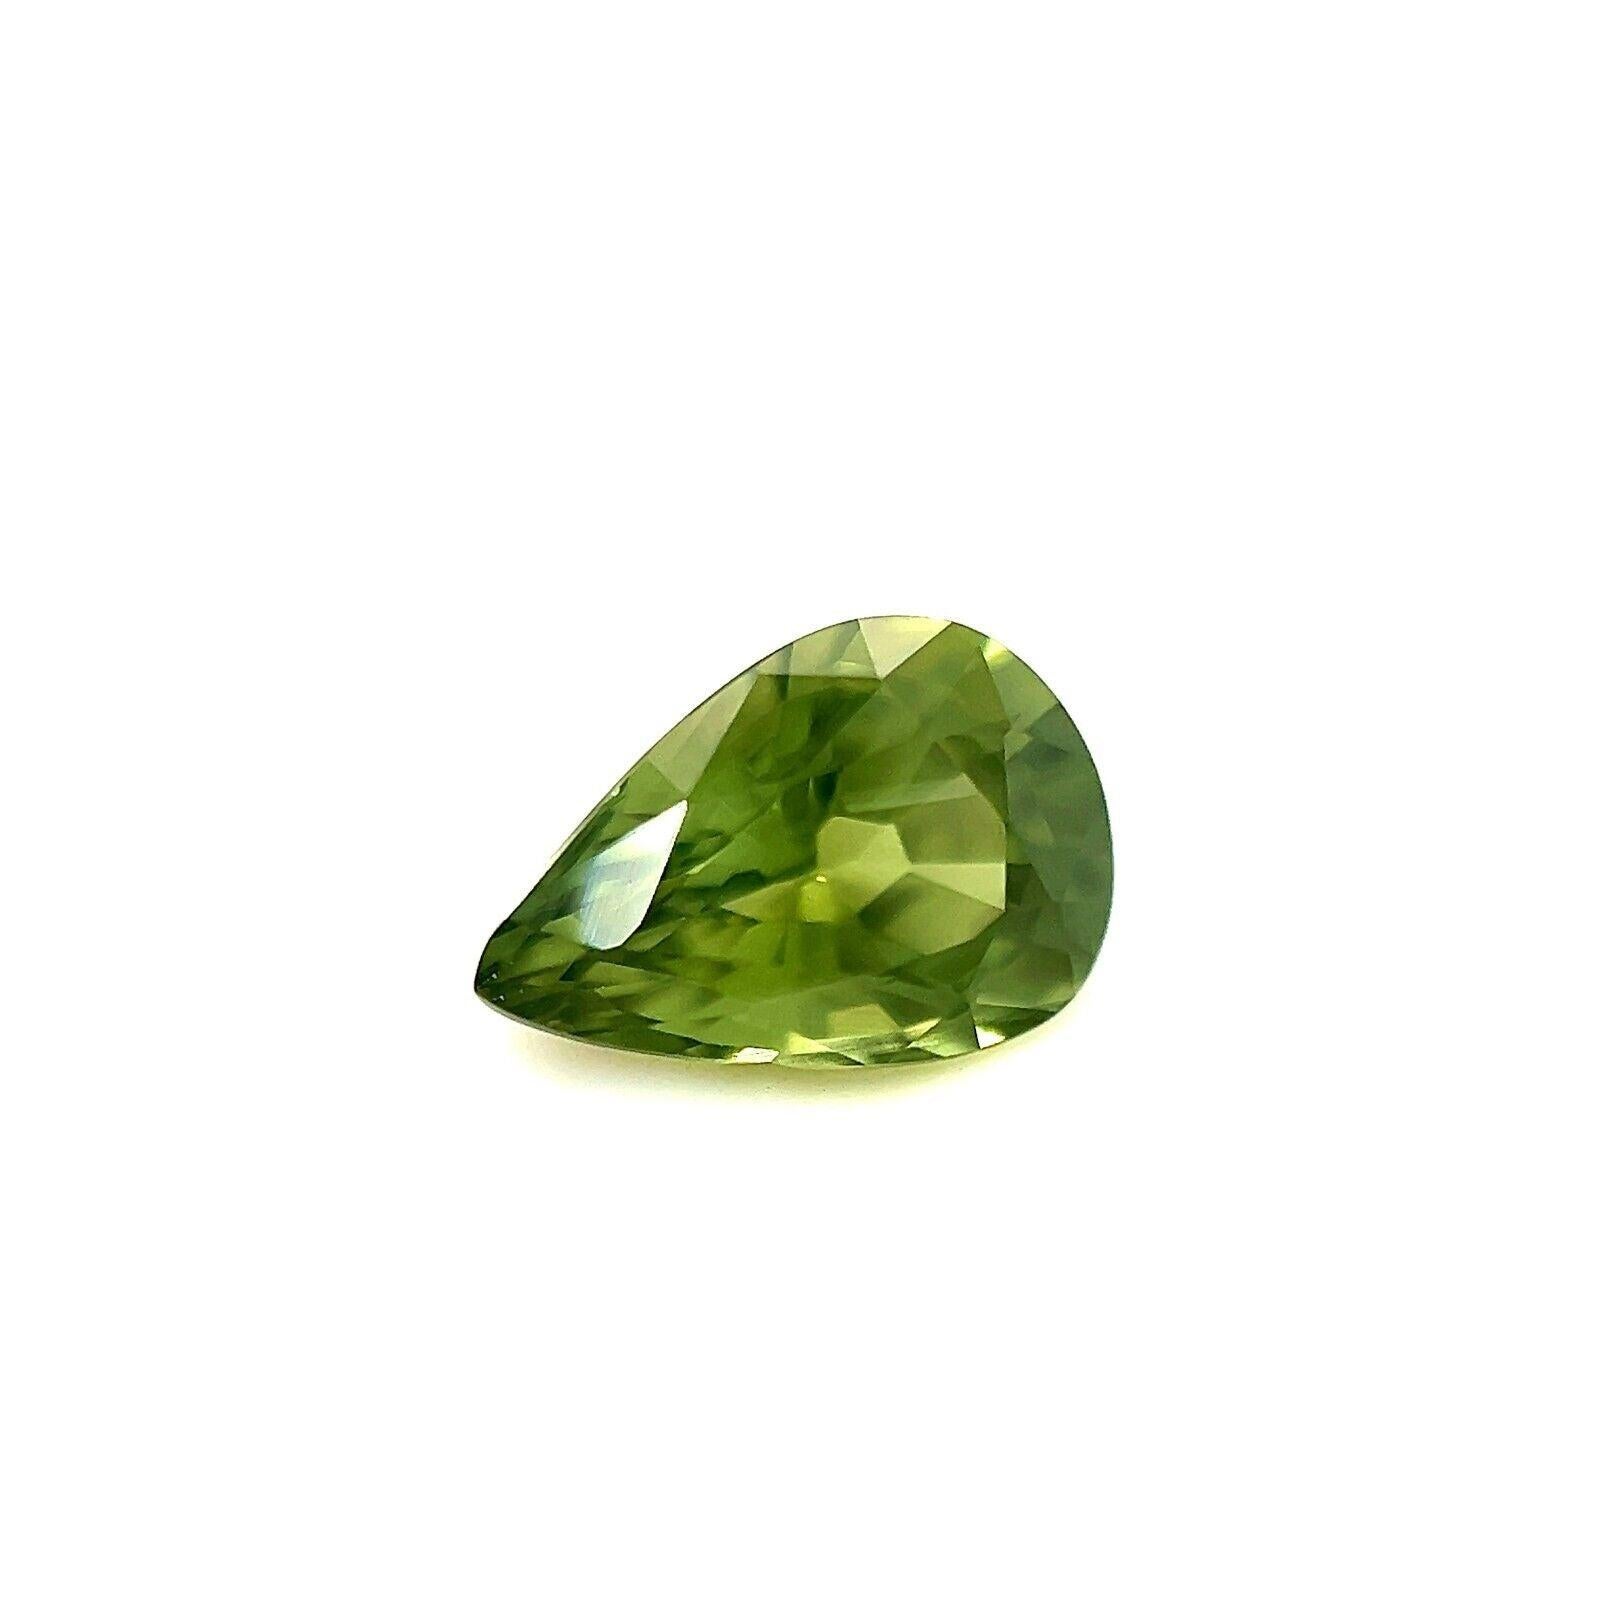 Fine 1.03ct Natural Green Sapphire Pear Teardrop Cut Loose Gem 7.4x5mm

Fine Natural Green Australian Sapphire Pear Cut Gemstone.
1.03 Carat with a beautiful and unique lime green colour and very good clarity, Also has an excellent pear cut and